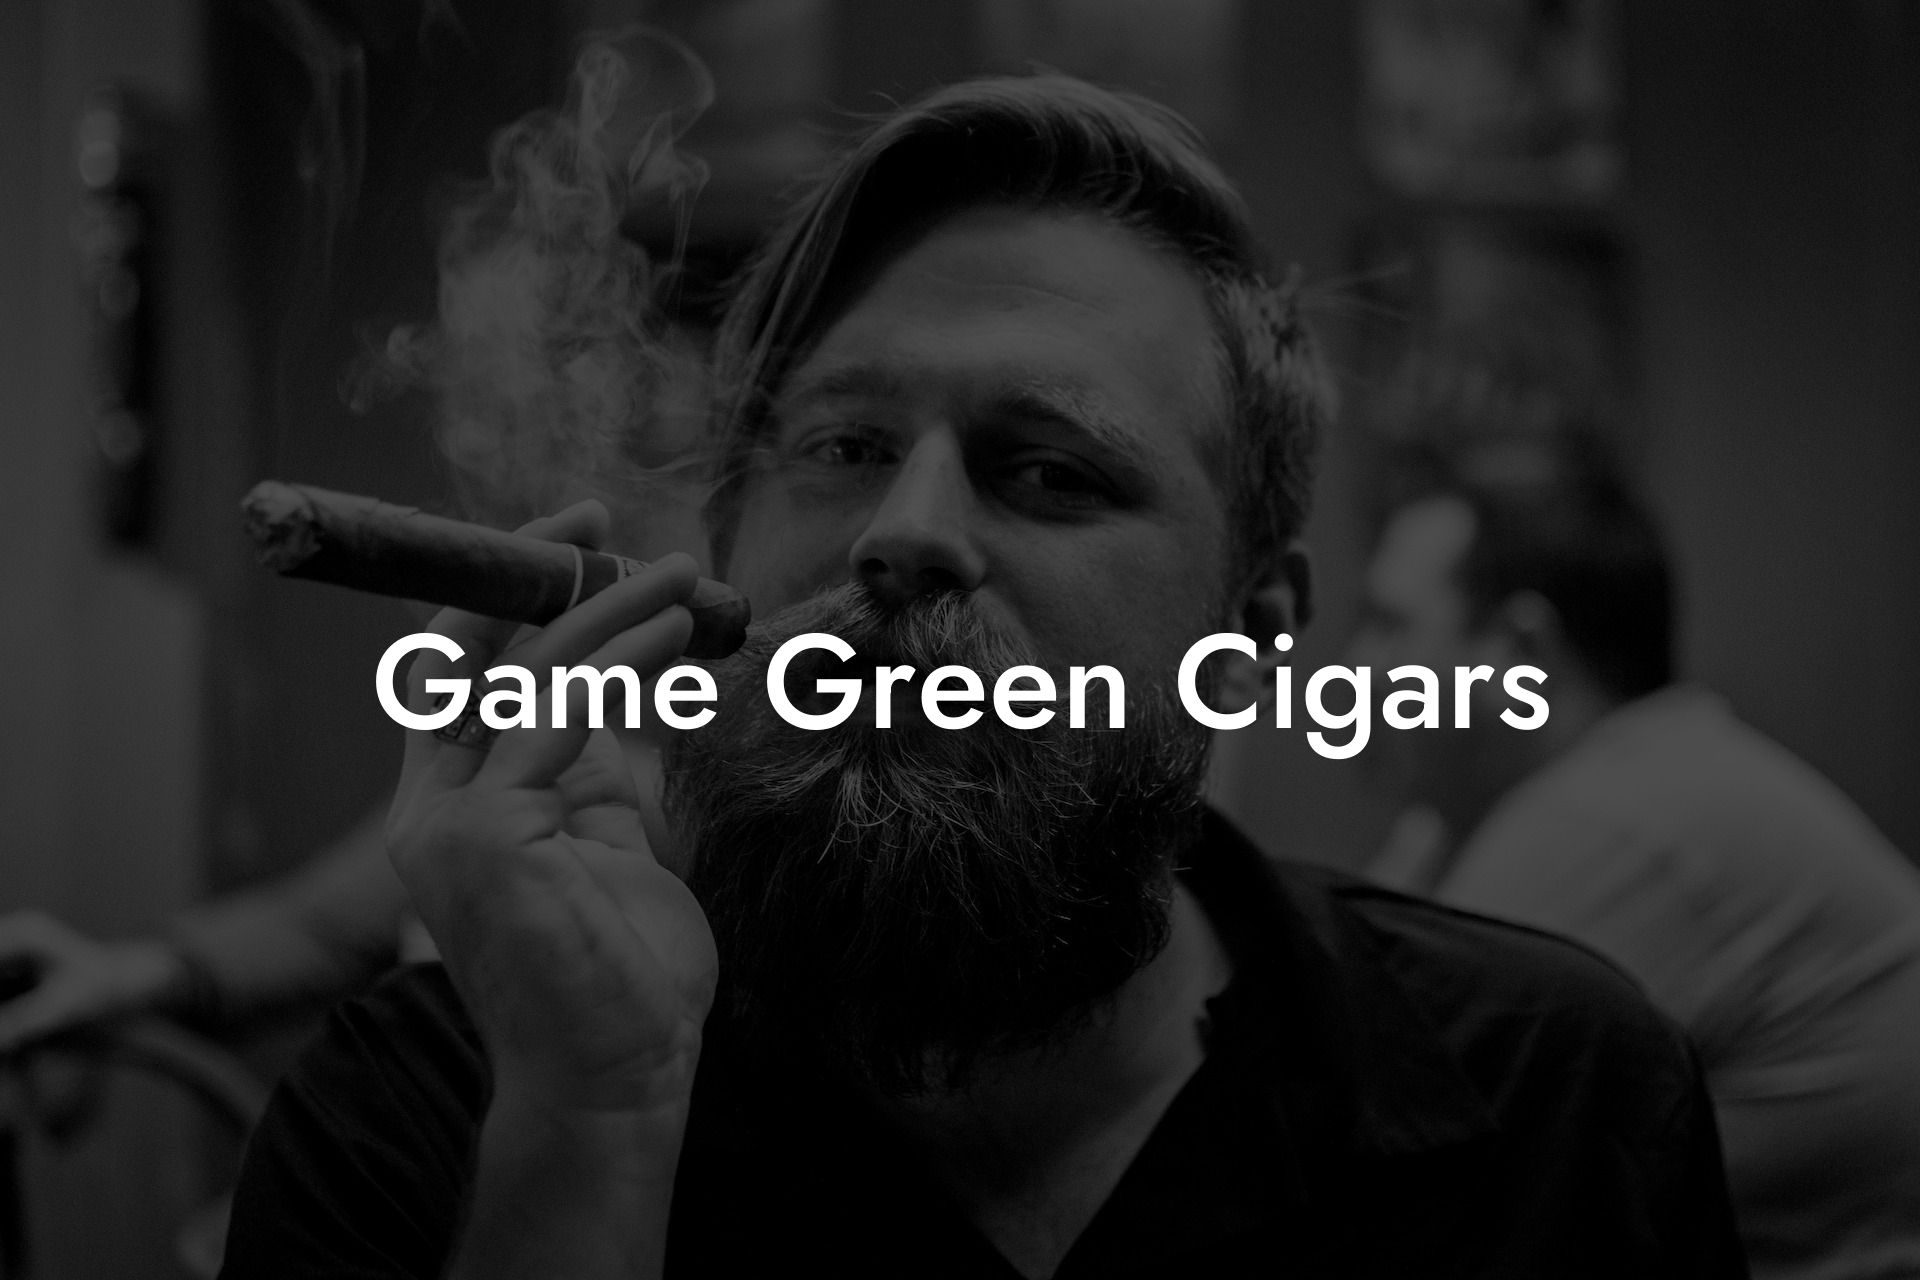 Game Green Cigars